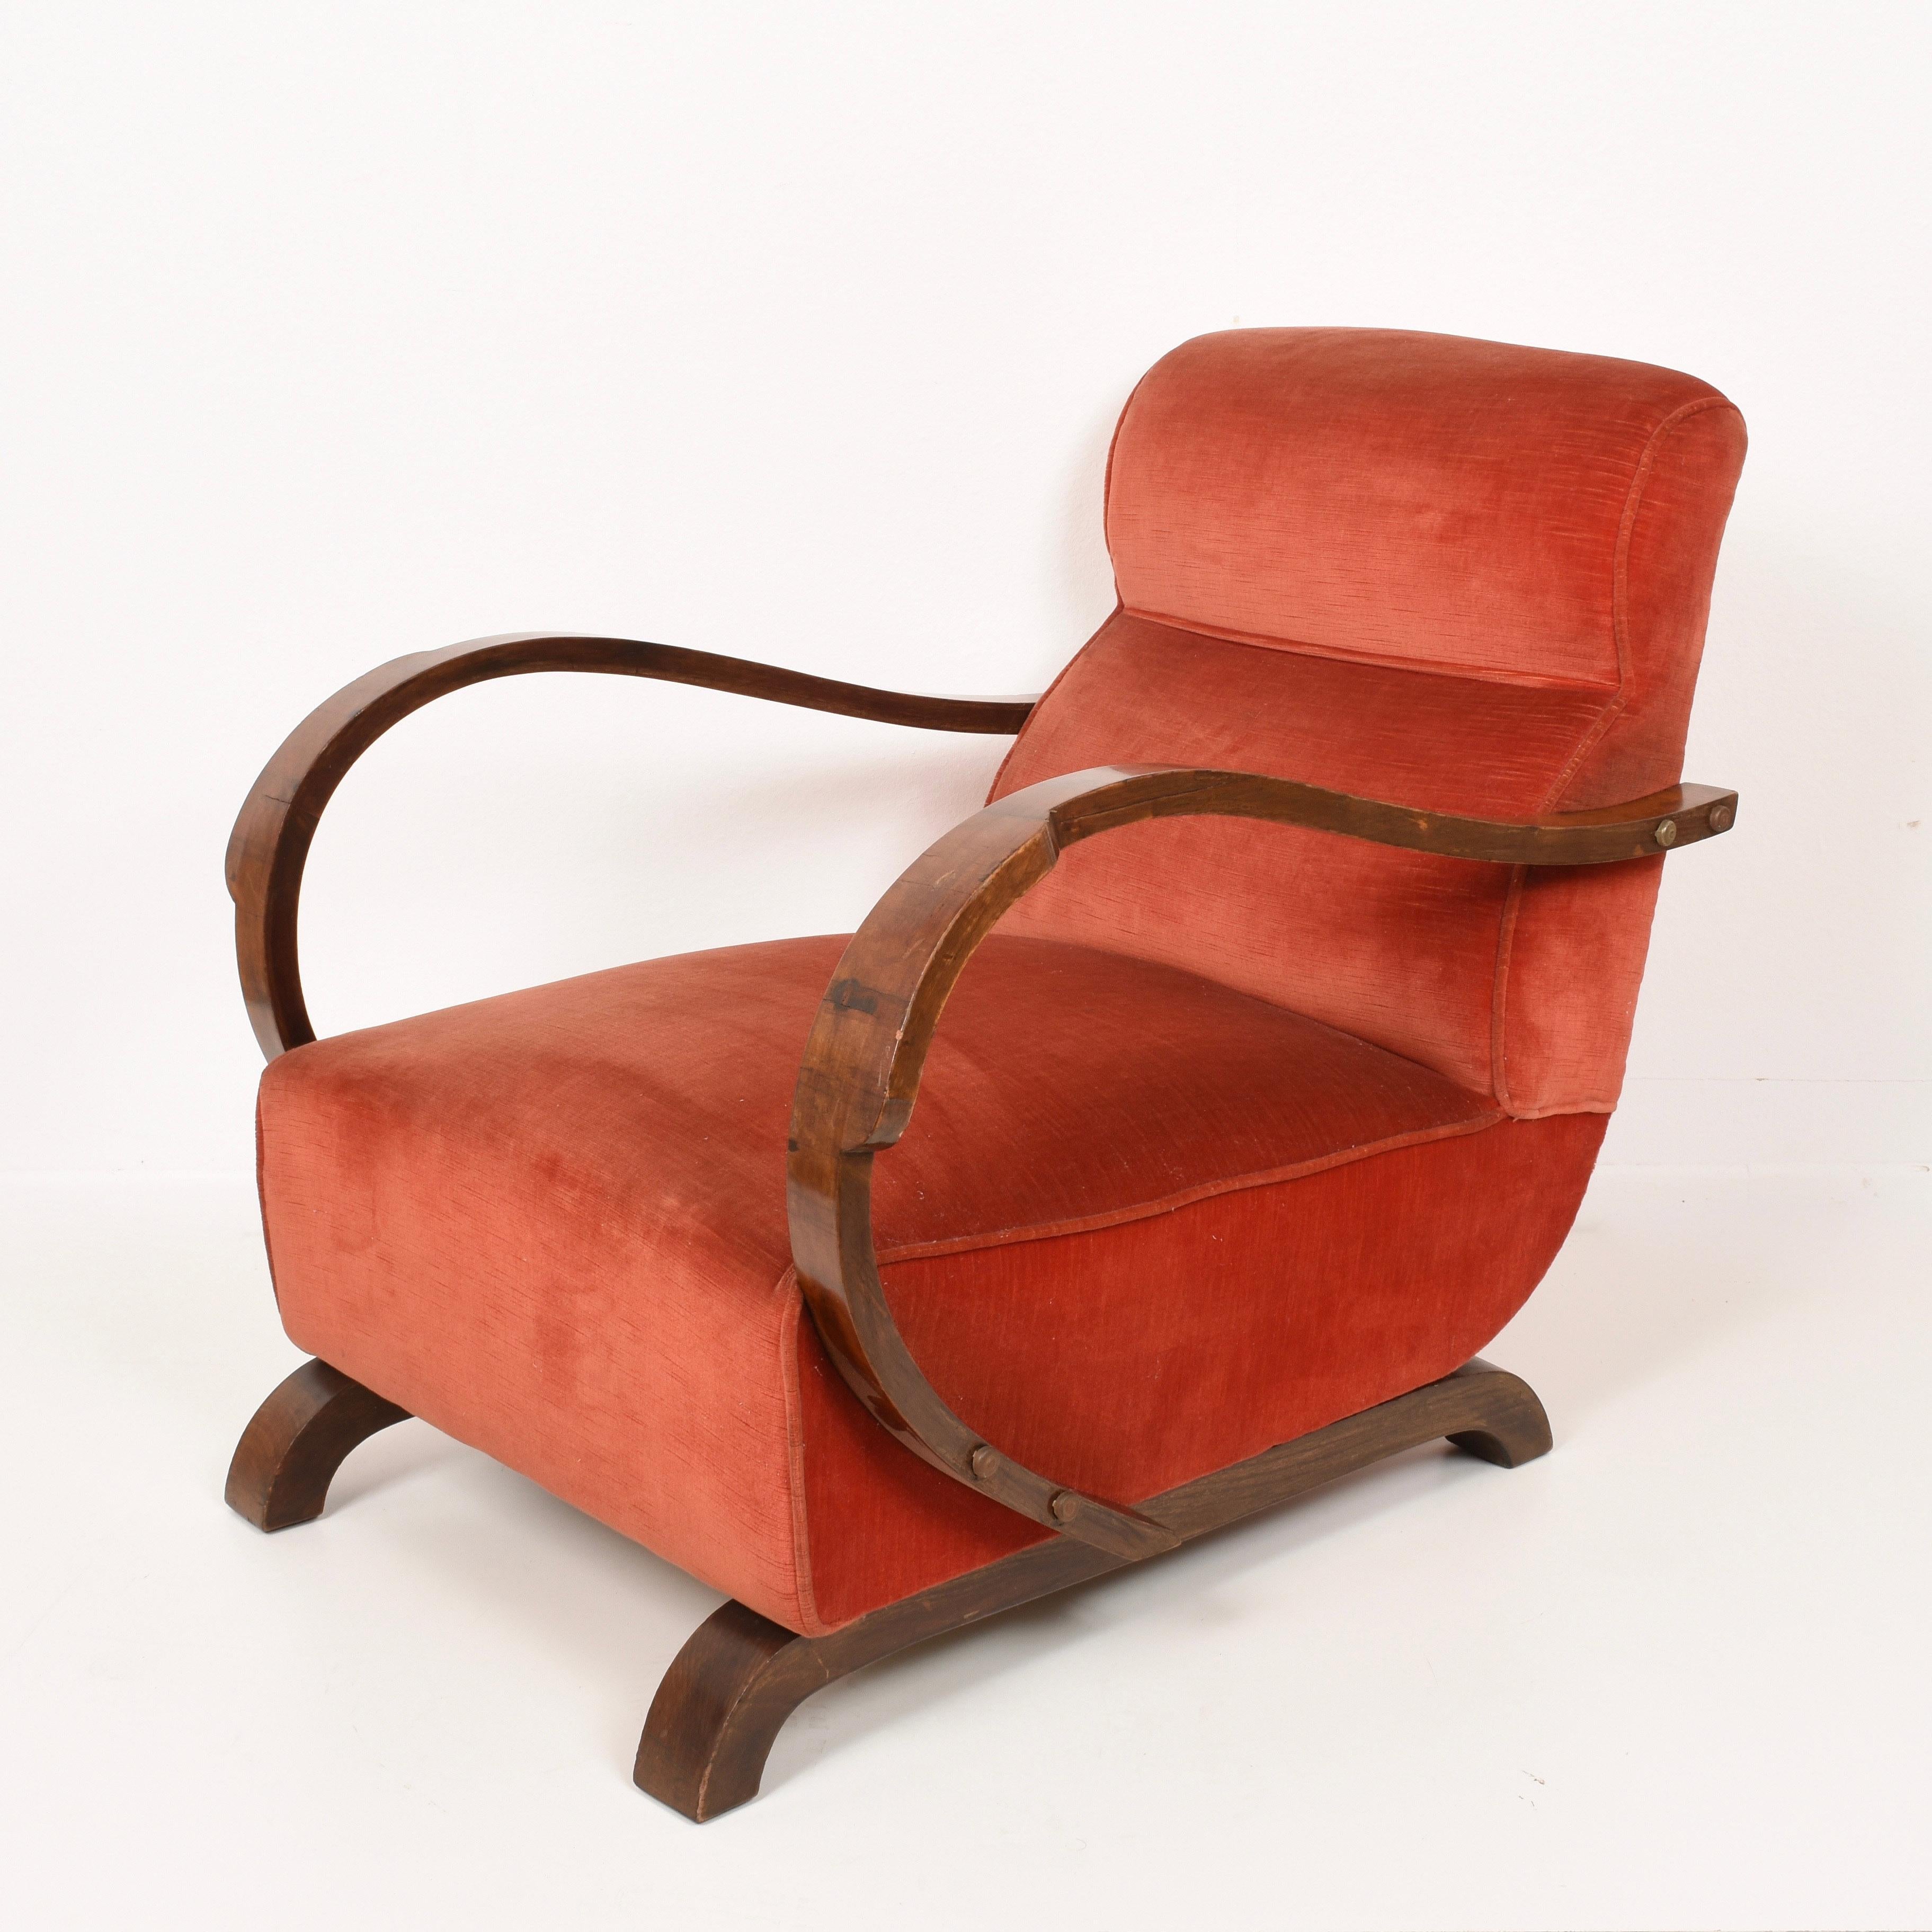 Pair of Art Deco walnut and red fabric armchairs and ottoman. This wonderful set was produced in Italy during the 1930.

The fabric of the ottoman is different from the chairs, both for color, as it is salmon pink, and type of fabric.

The more